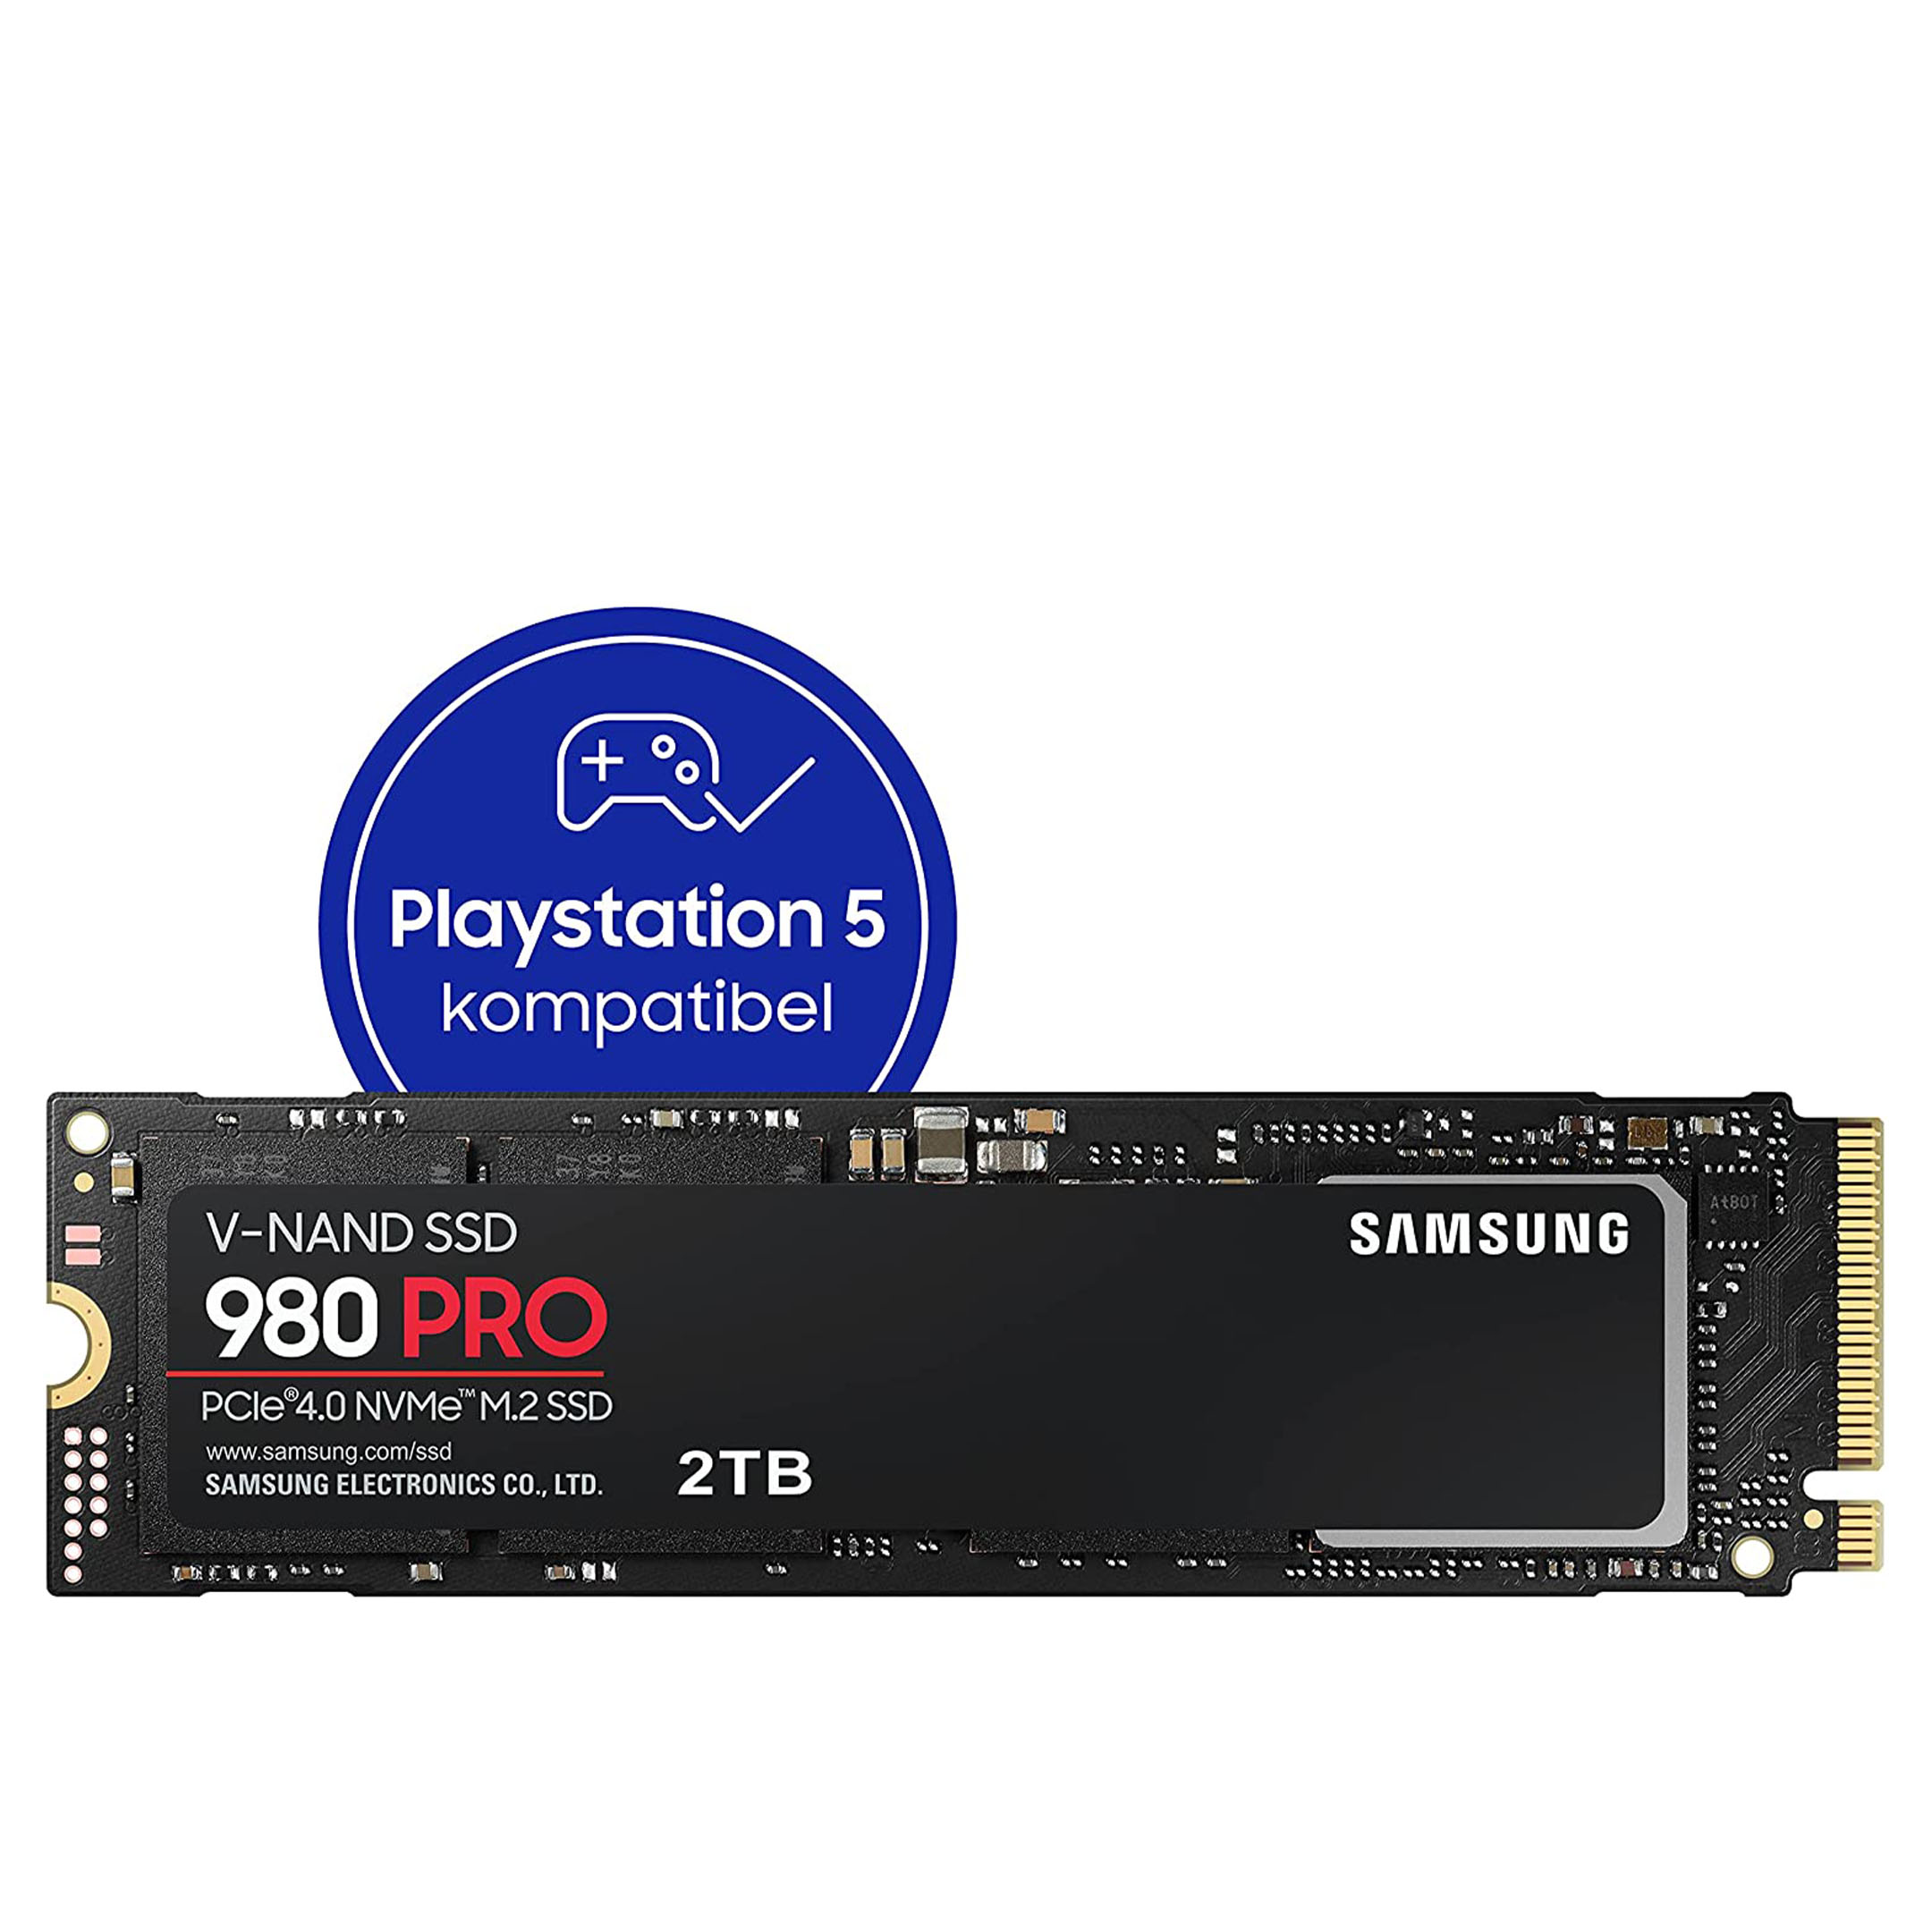 SAMSUNG 980 PRO 2TB 4 NVMe M.2 SOLID STATE DRIVE - MZ-V8P2T0BW